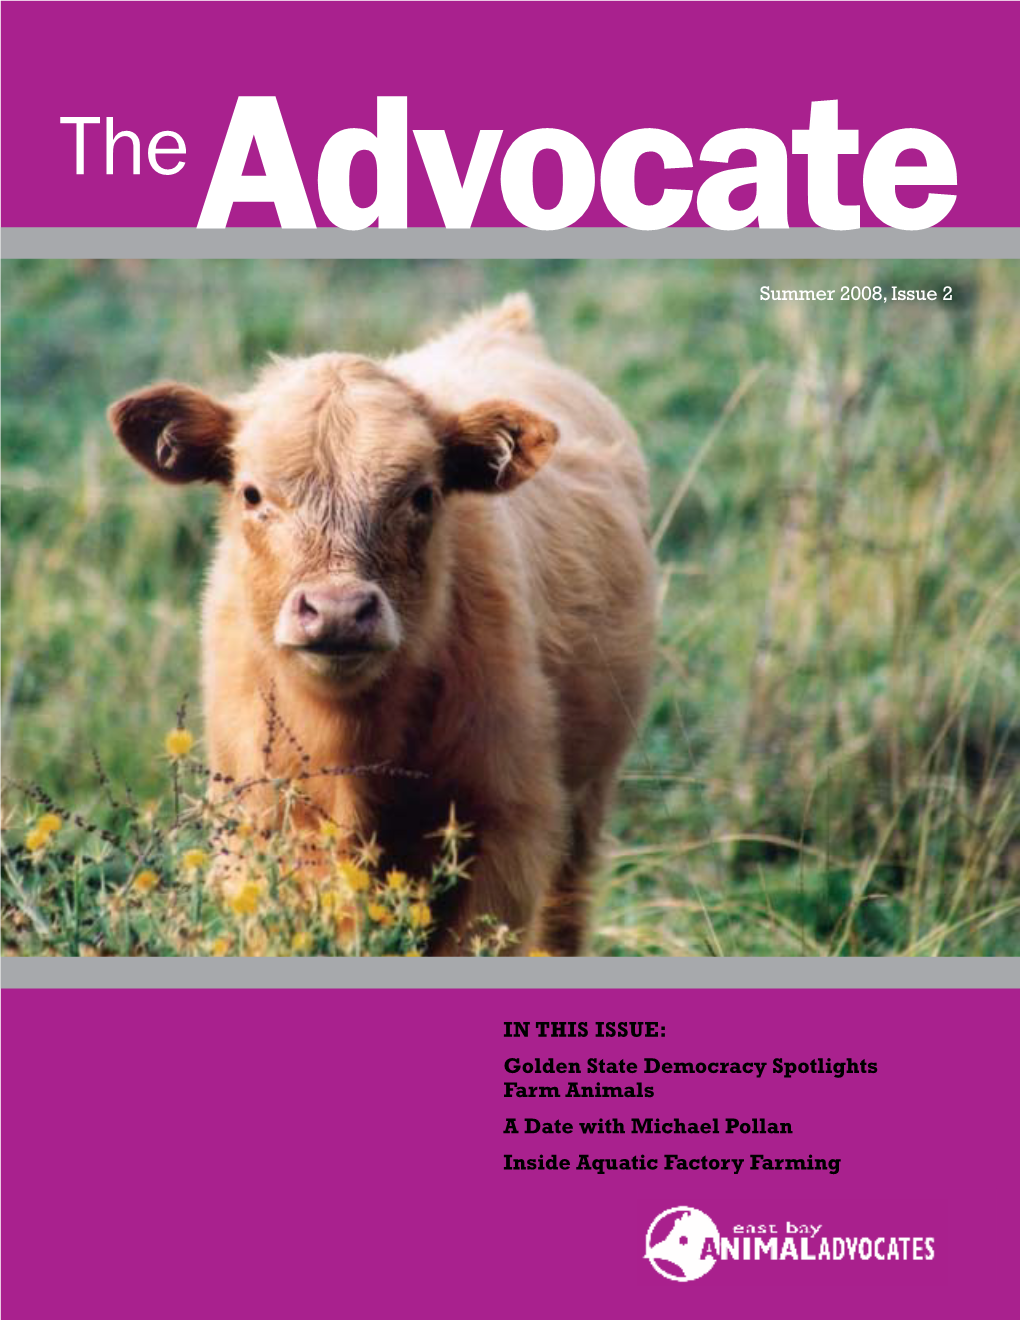 The Advocate Summer 2008